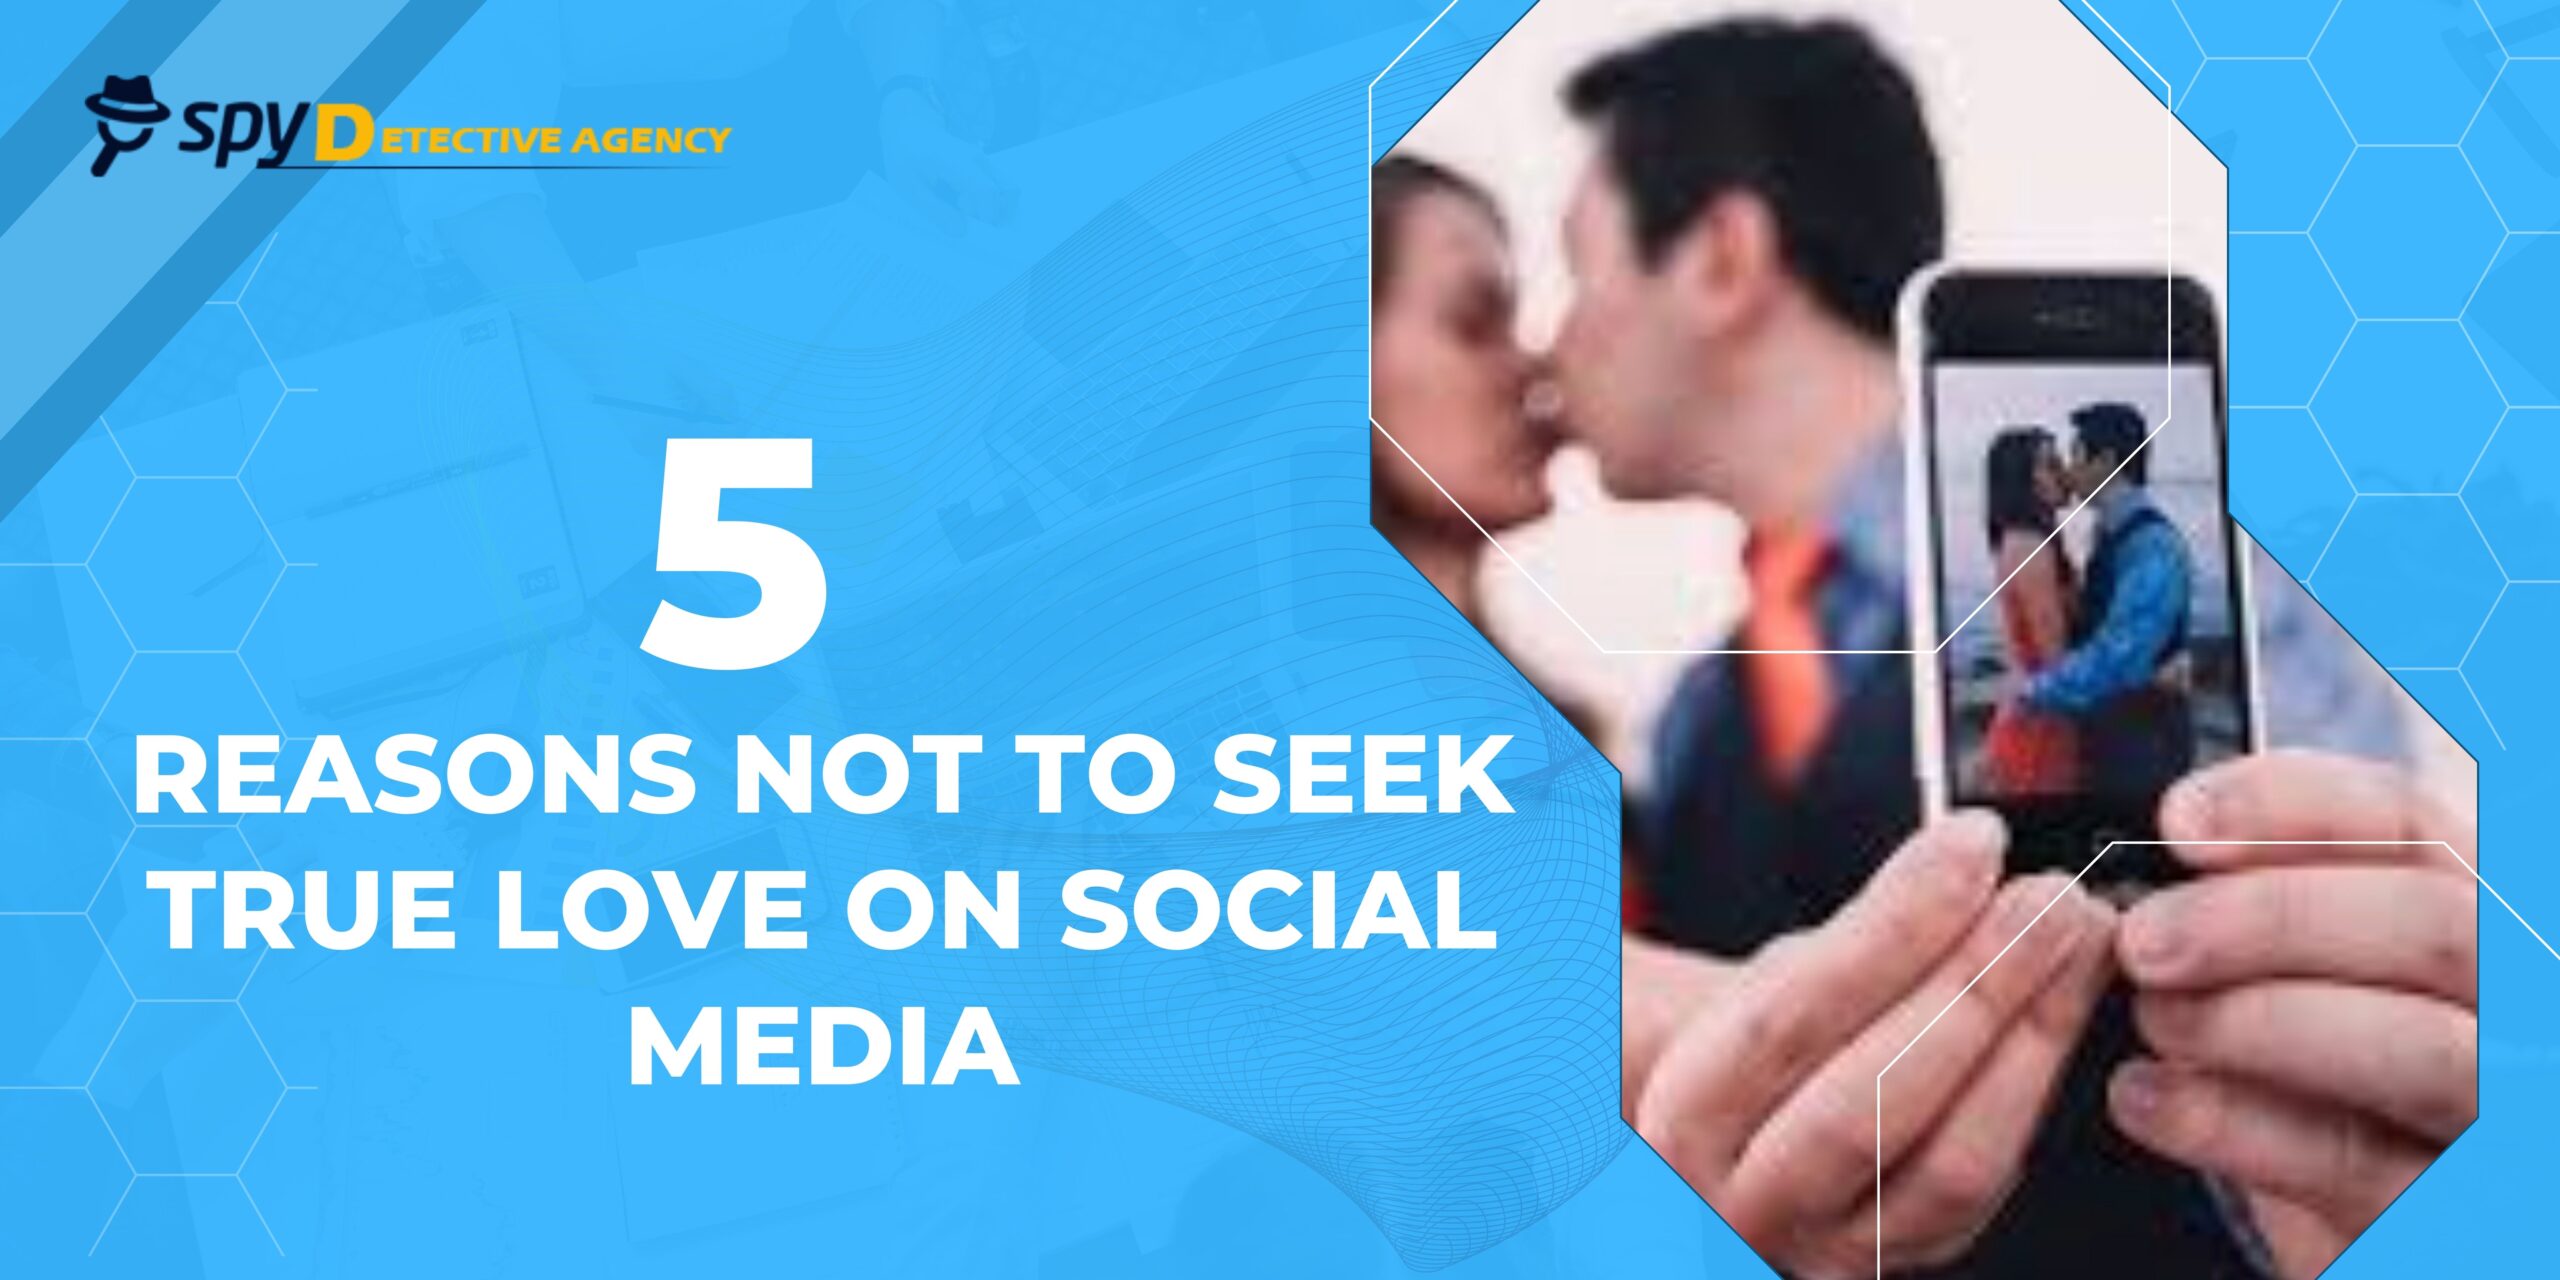 5 reasons not to look for true love on social media